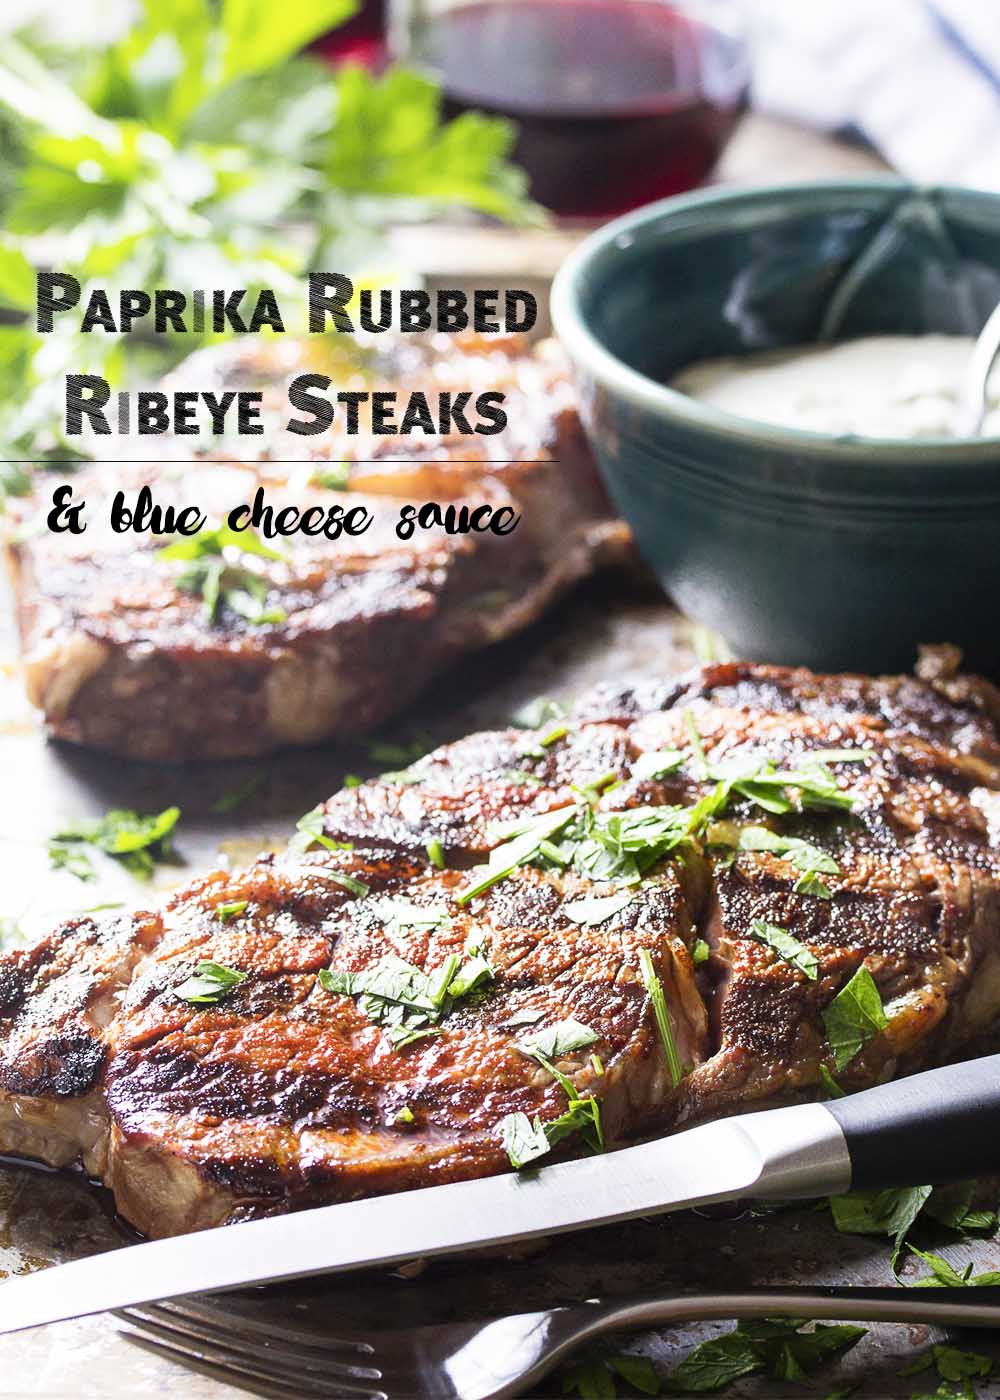 This Spanish inspired grilled ribeye steak is rubbed with paprika and smoked paprika and then topped with a blue cheese brandy sauce for an easy and flavorful main course. | justalittlebitofbacon.com